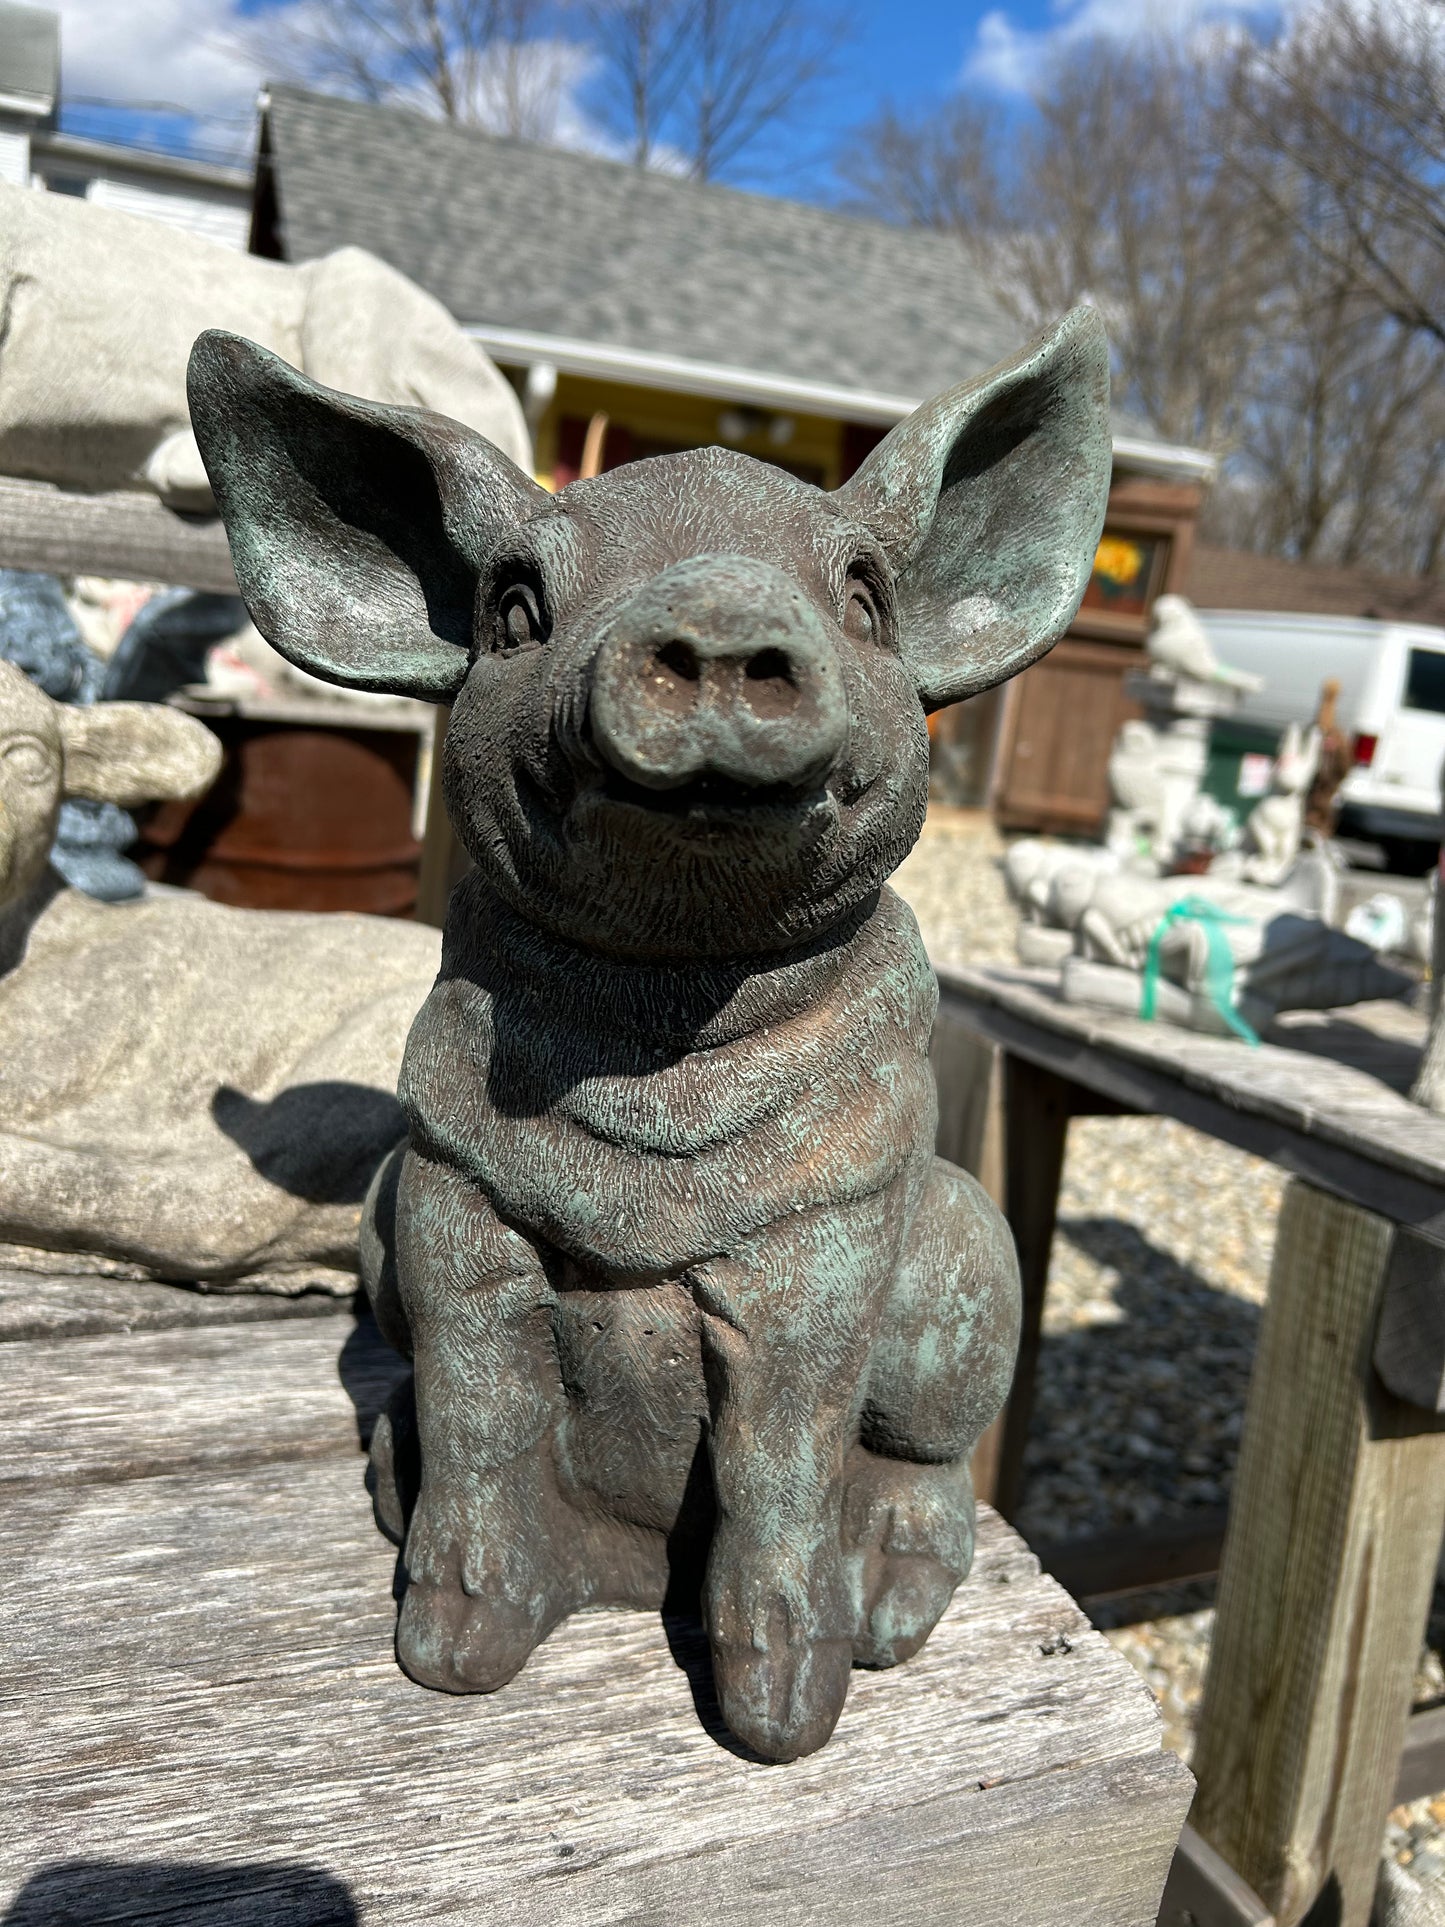 Arnold the Pig